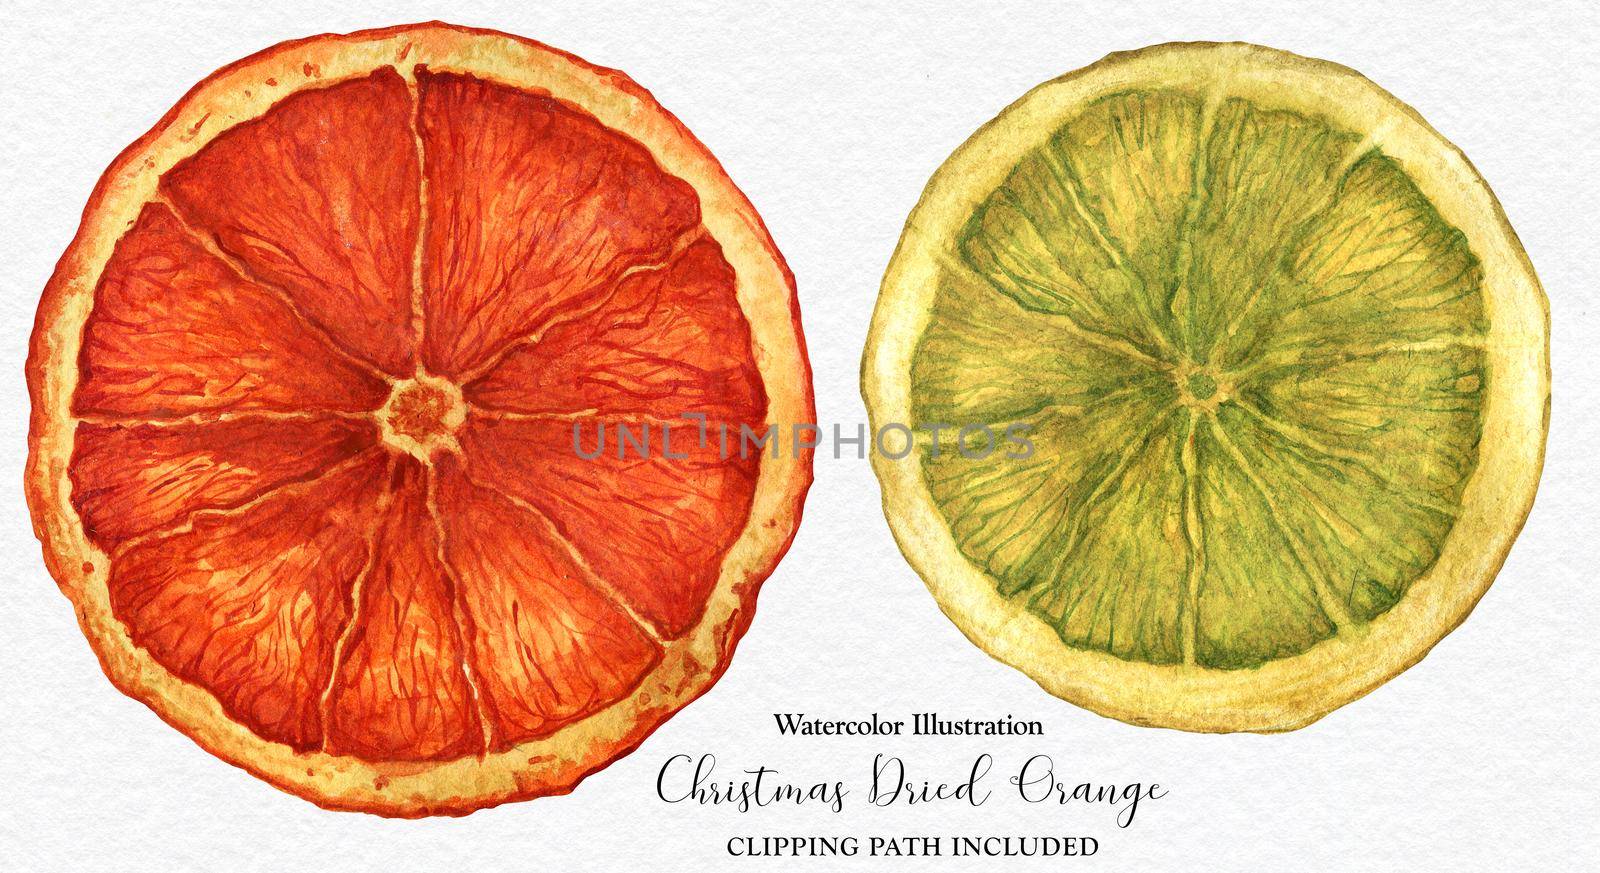 Slices of Christmas Dried Oranges, watercolor with clipping path